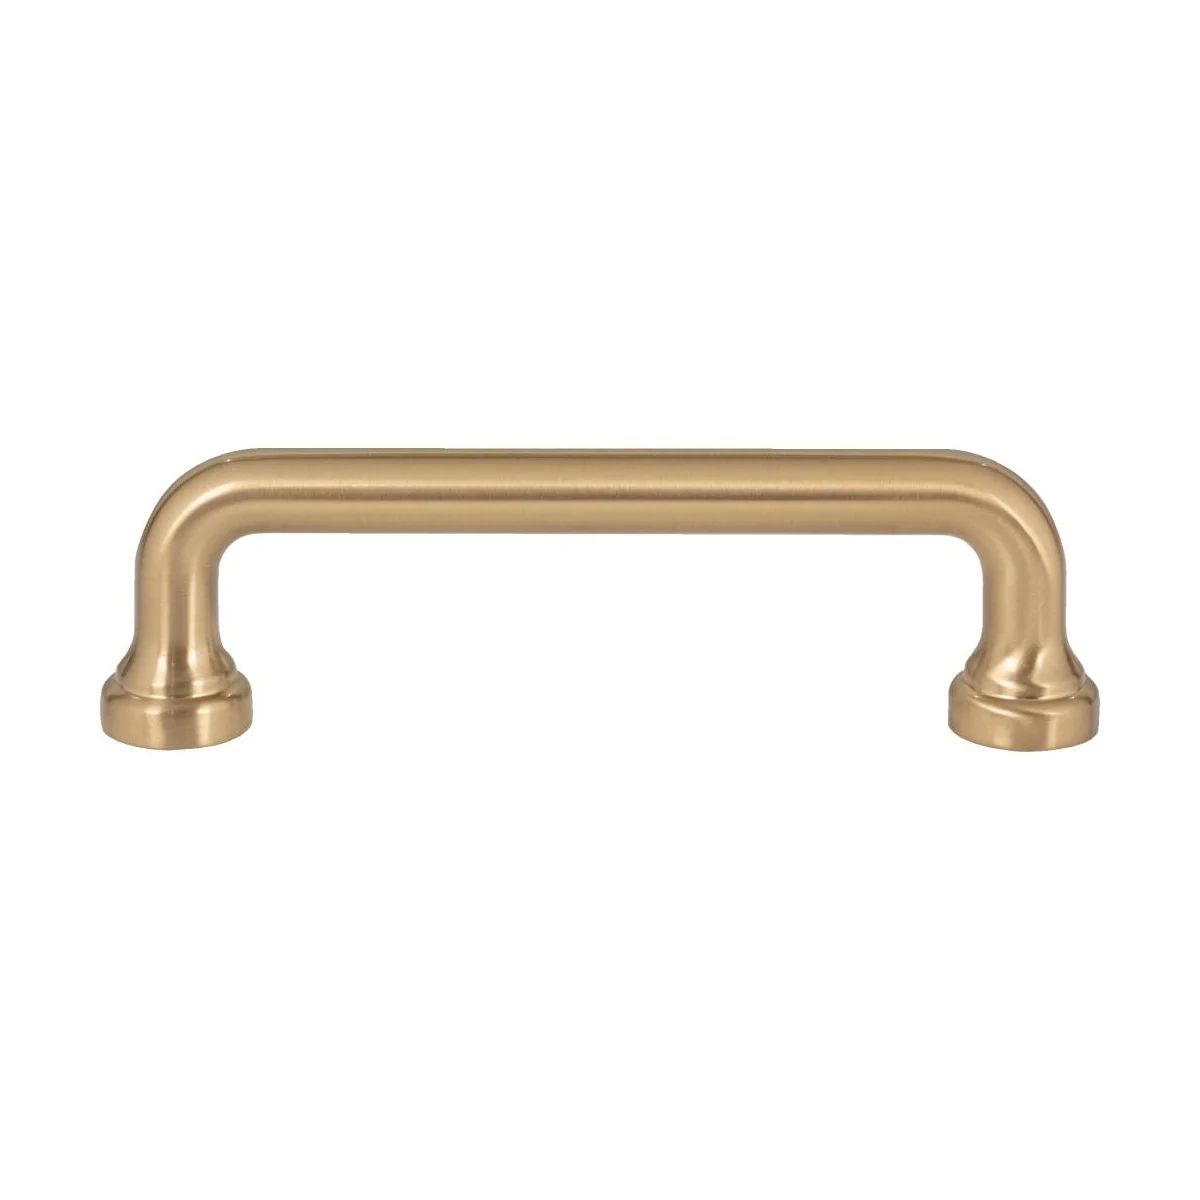 Malin 3-3/4 Inch Center to Center Handle Cabinet Pull | Build.com, Inc.